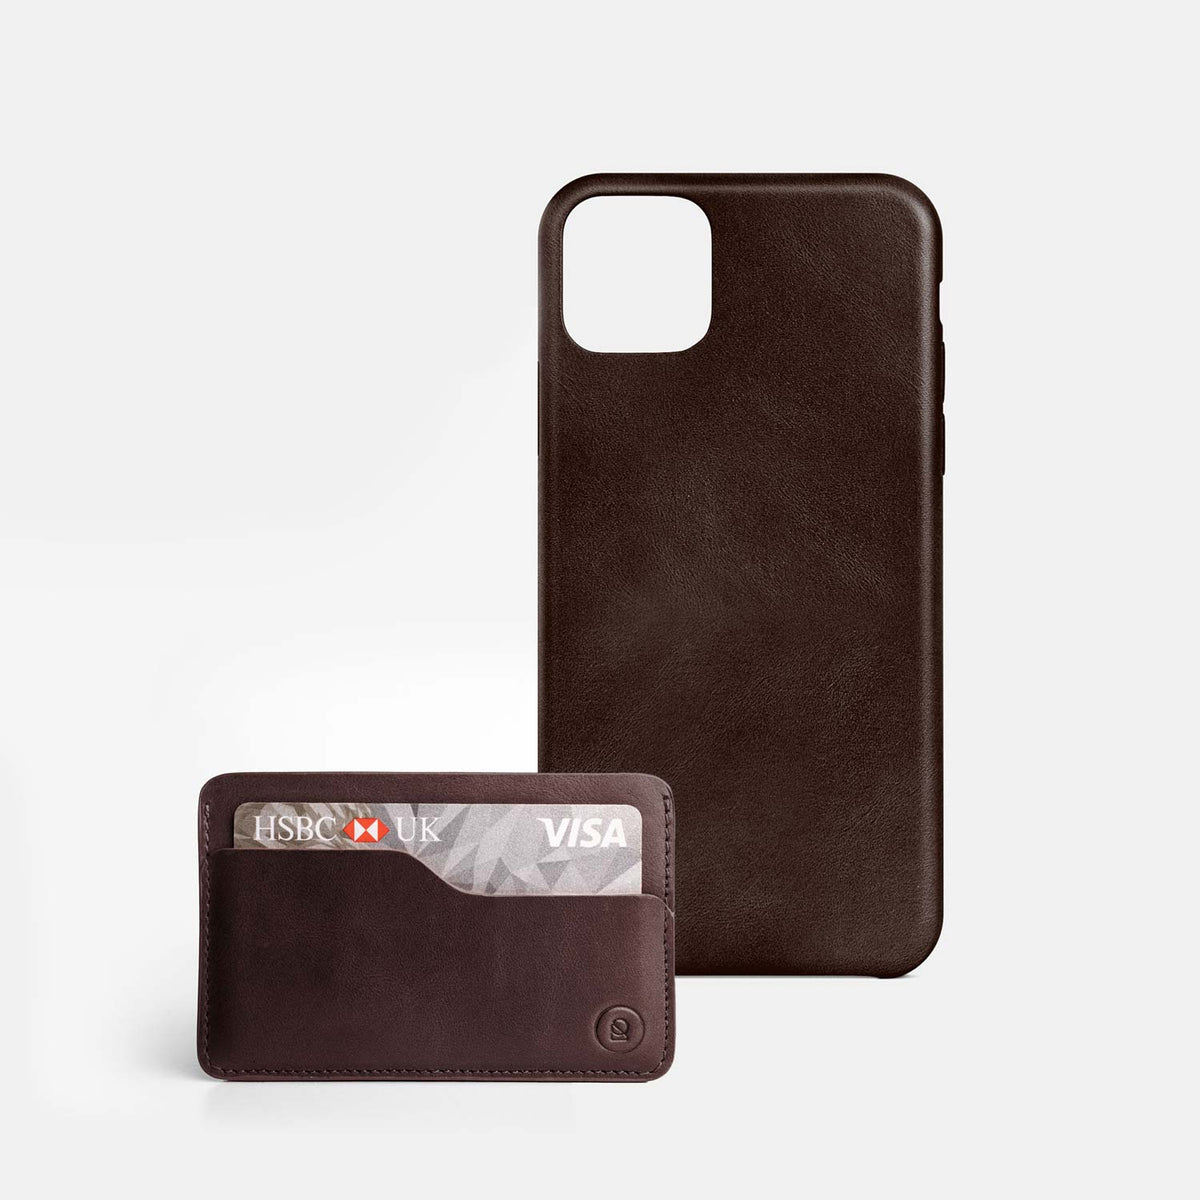 Leather iPhone 12 Pro Max Shell Case - Dark Brown - RYAN London